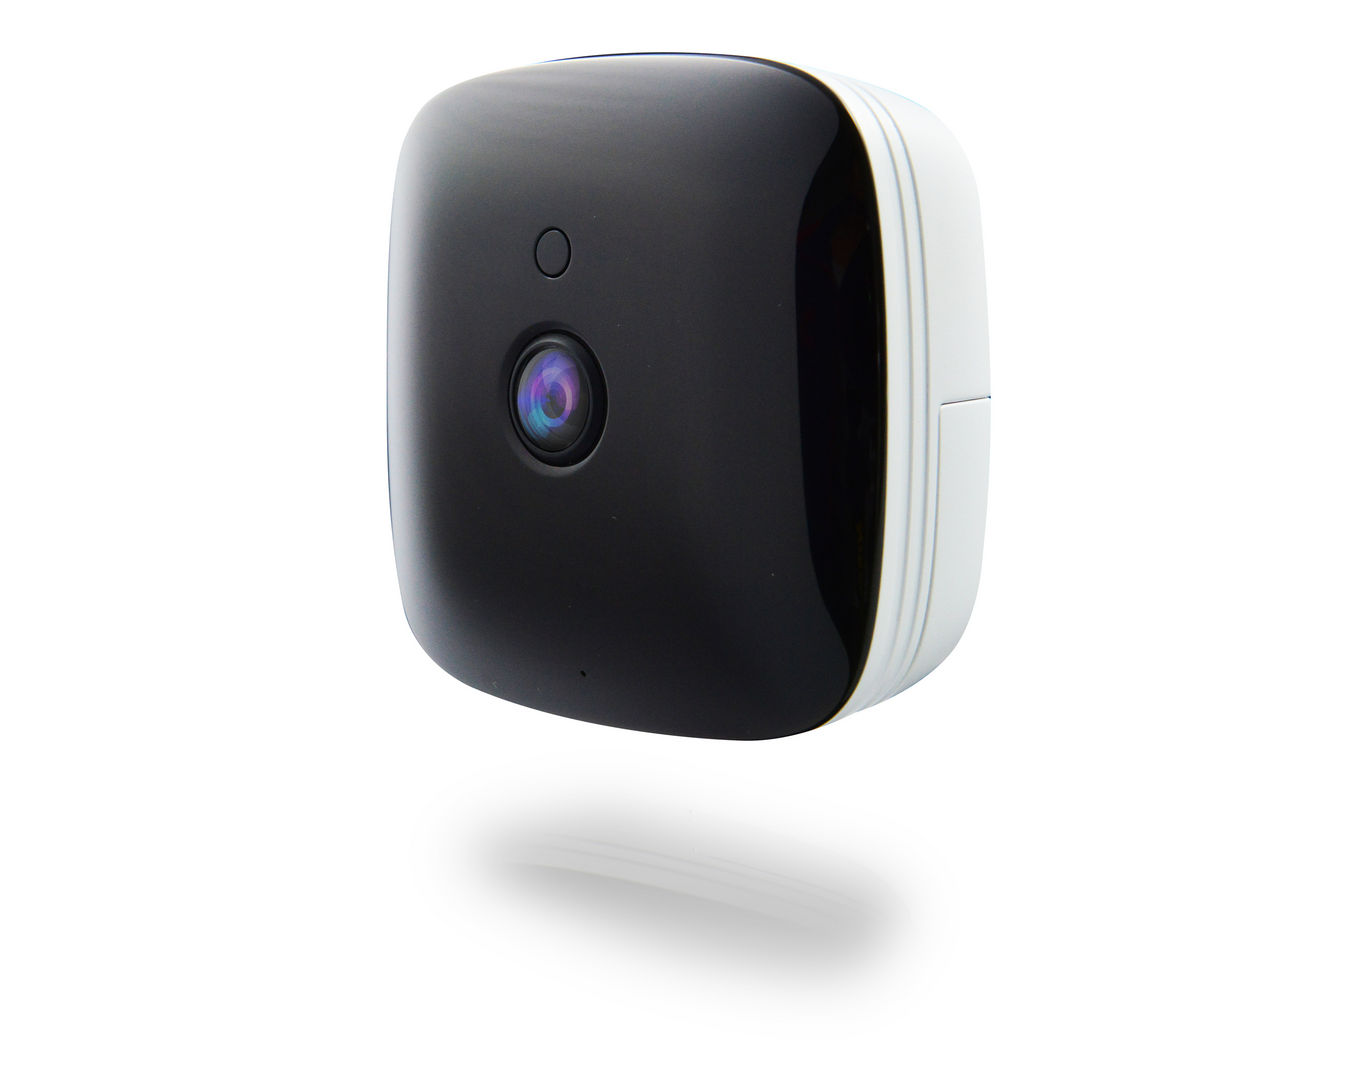 Details about   Sercomm Full HD IP Camera RC4551 See Description 